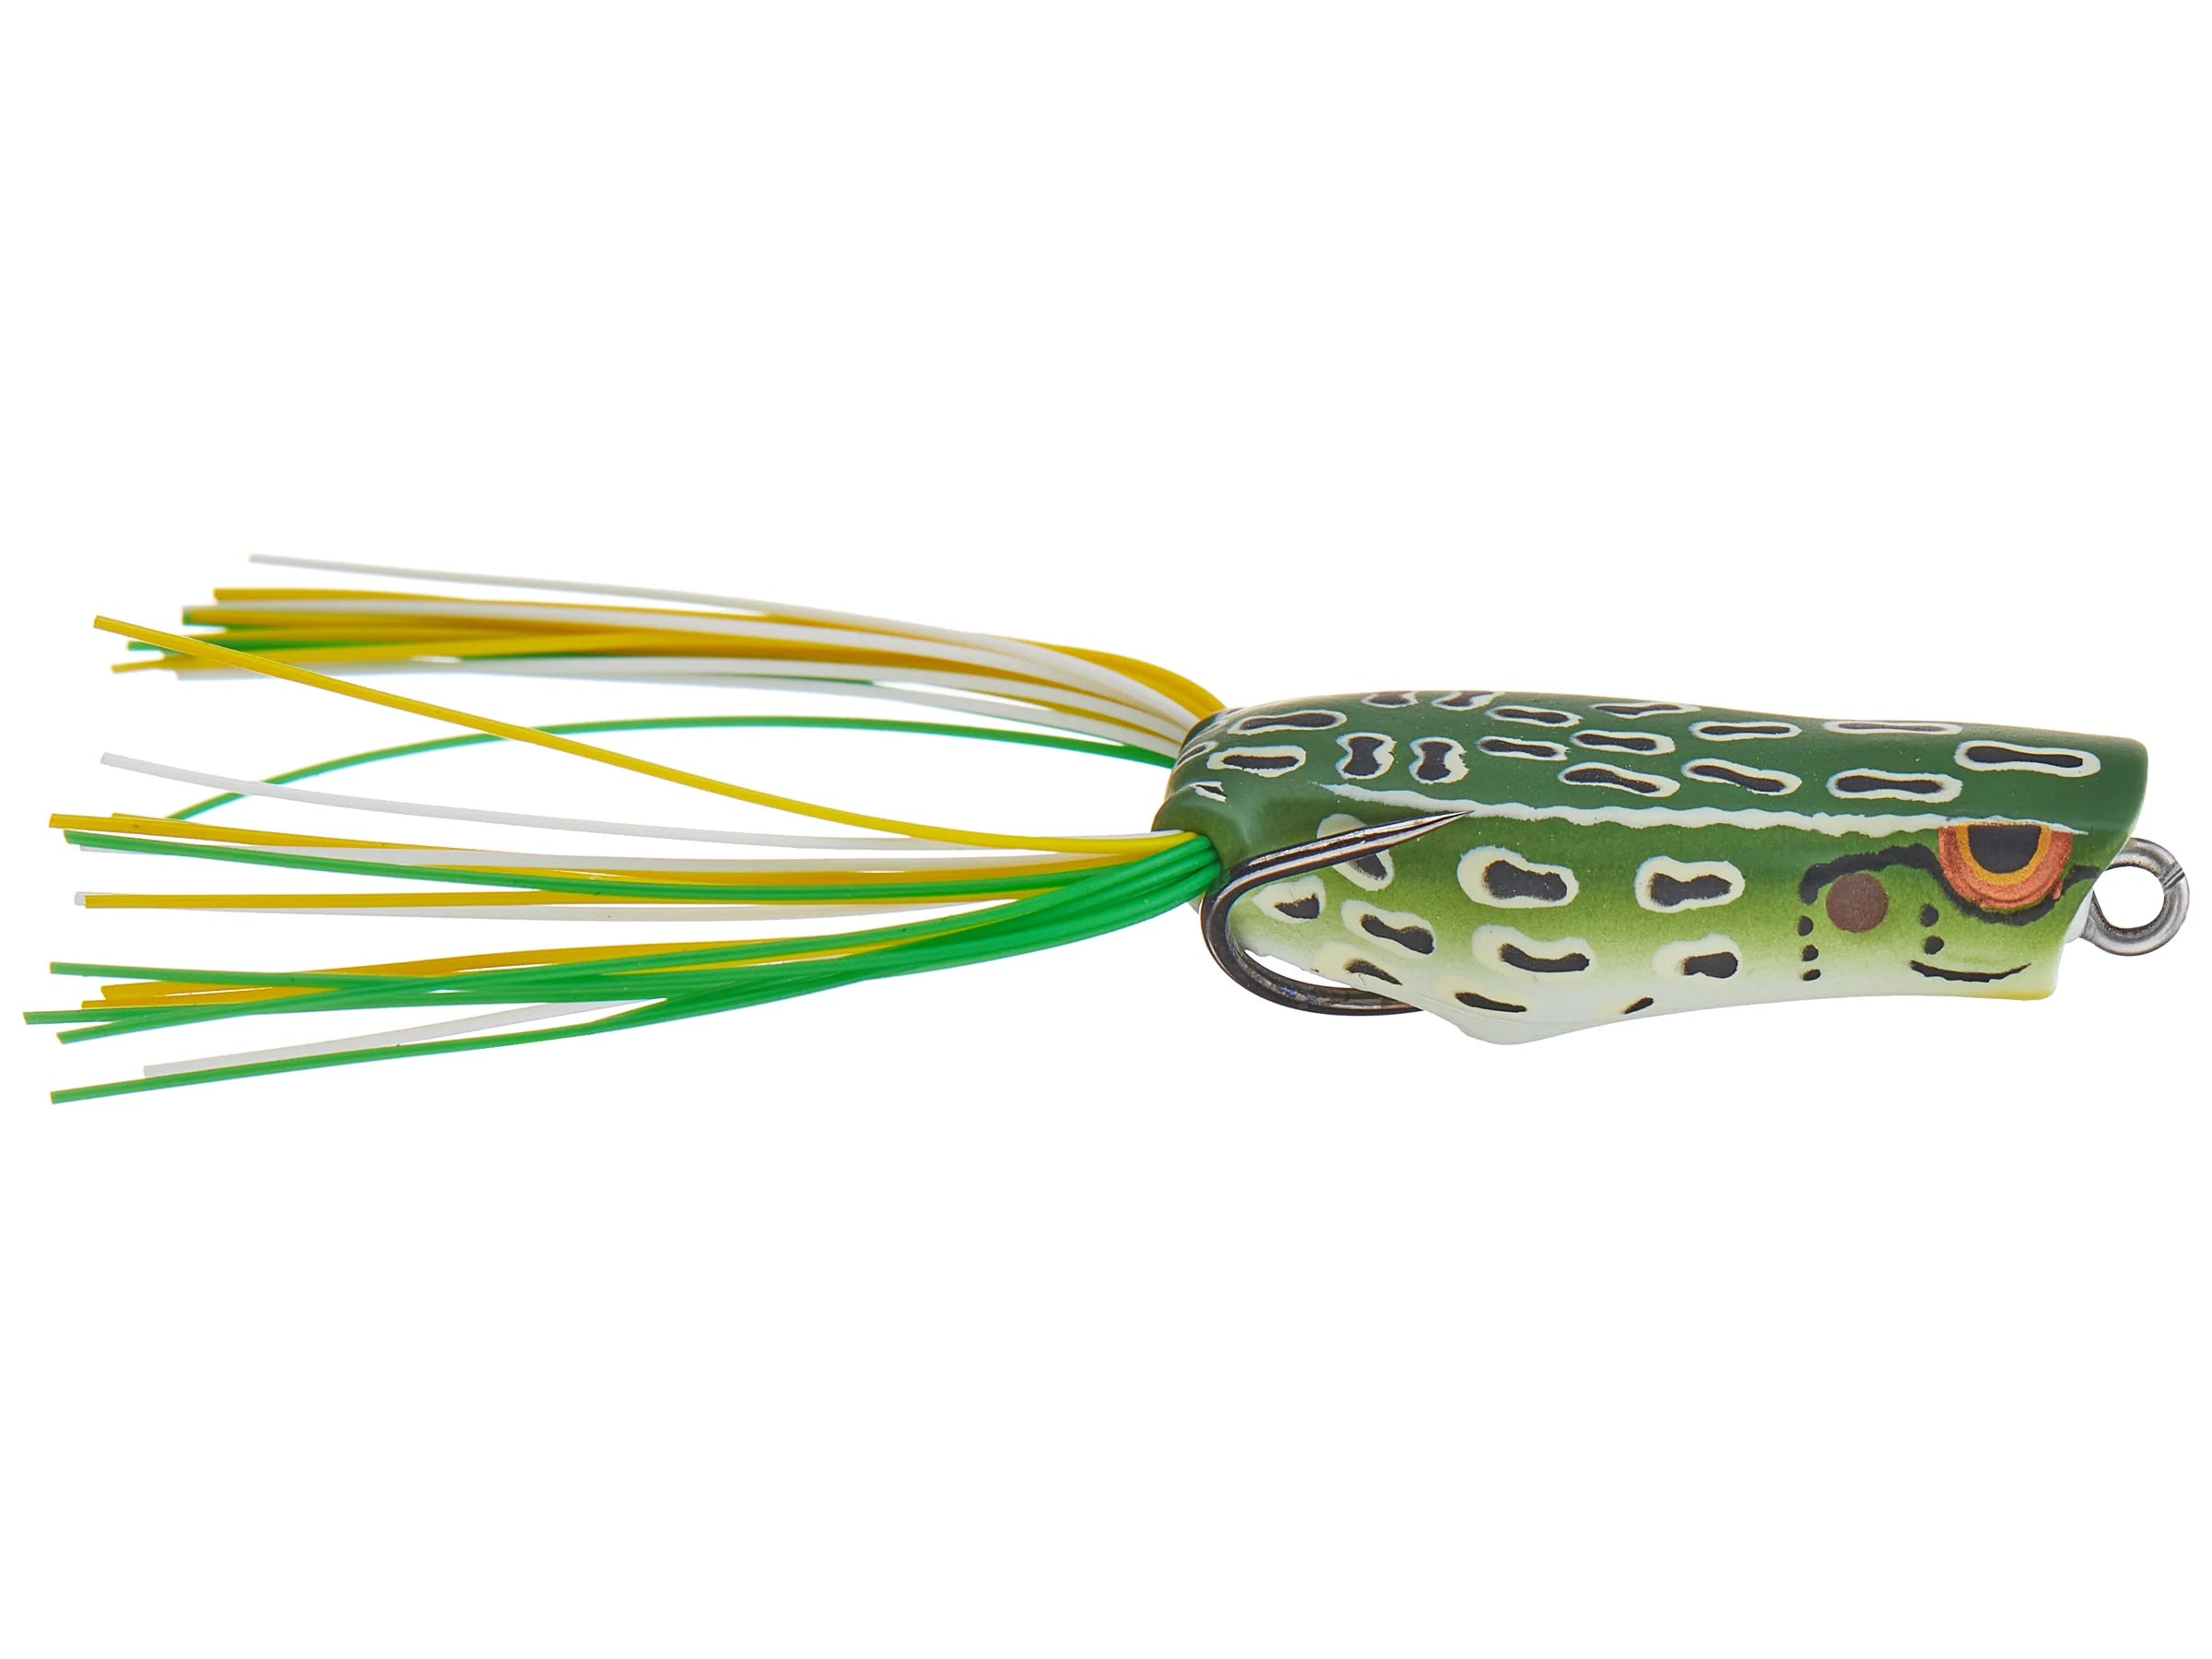 SPRO RAT WAKEBAIT  Copperstate Tackle